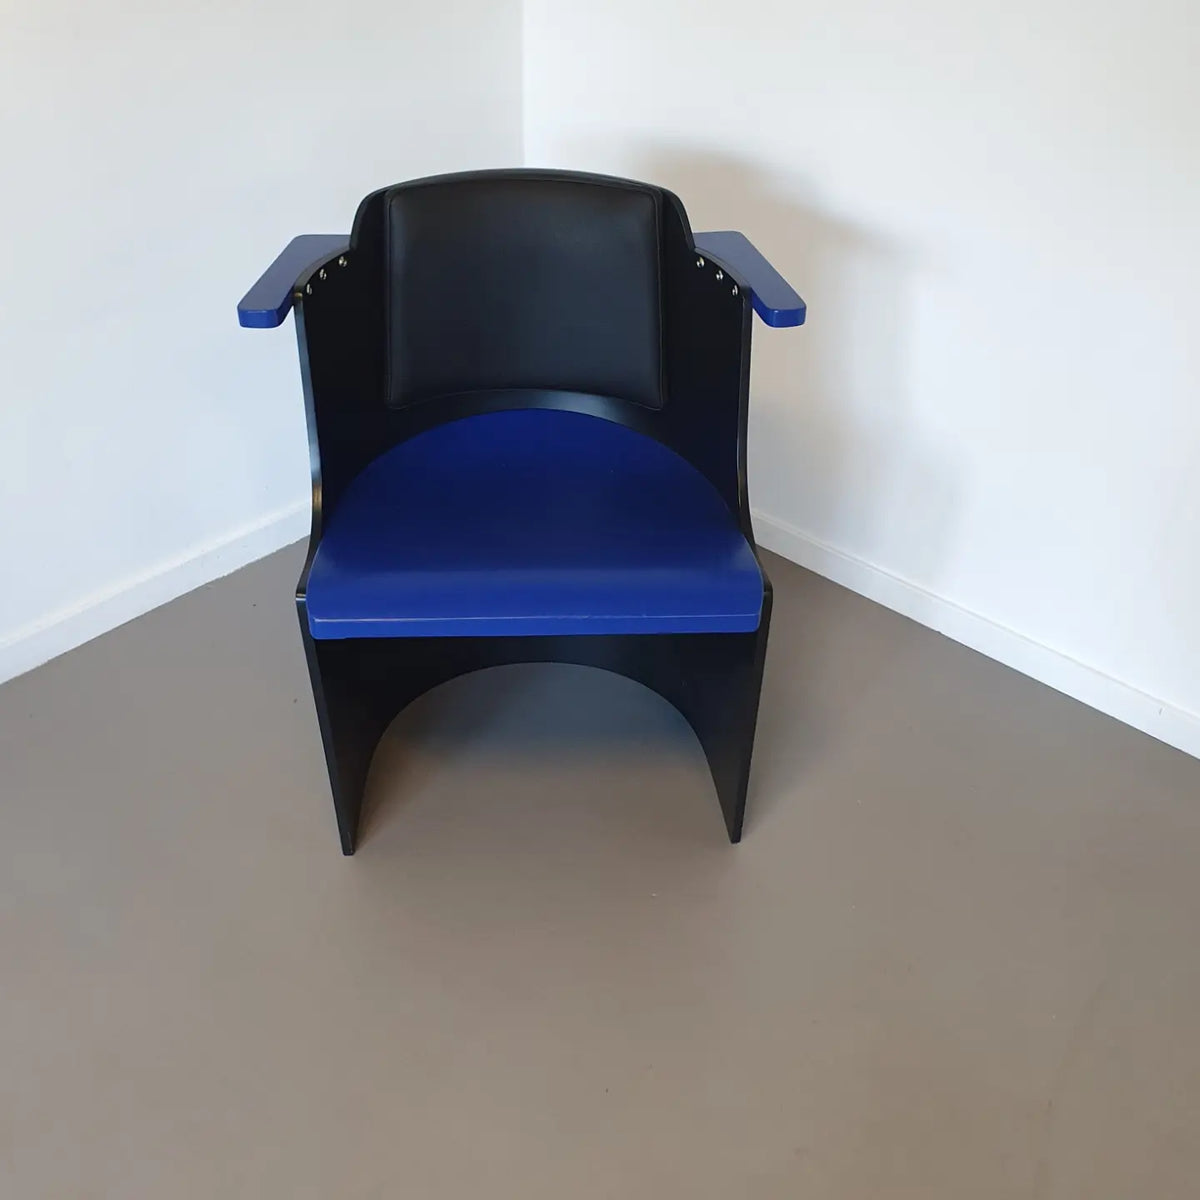 Chair model D61, designed by El Lissitzky in 1930. Manufactured in Germany by Tecta, circa 1970.